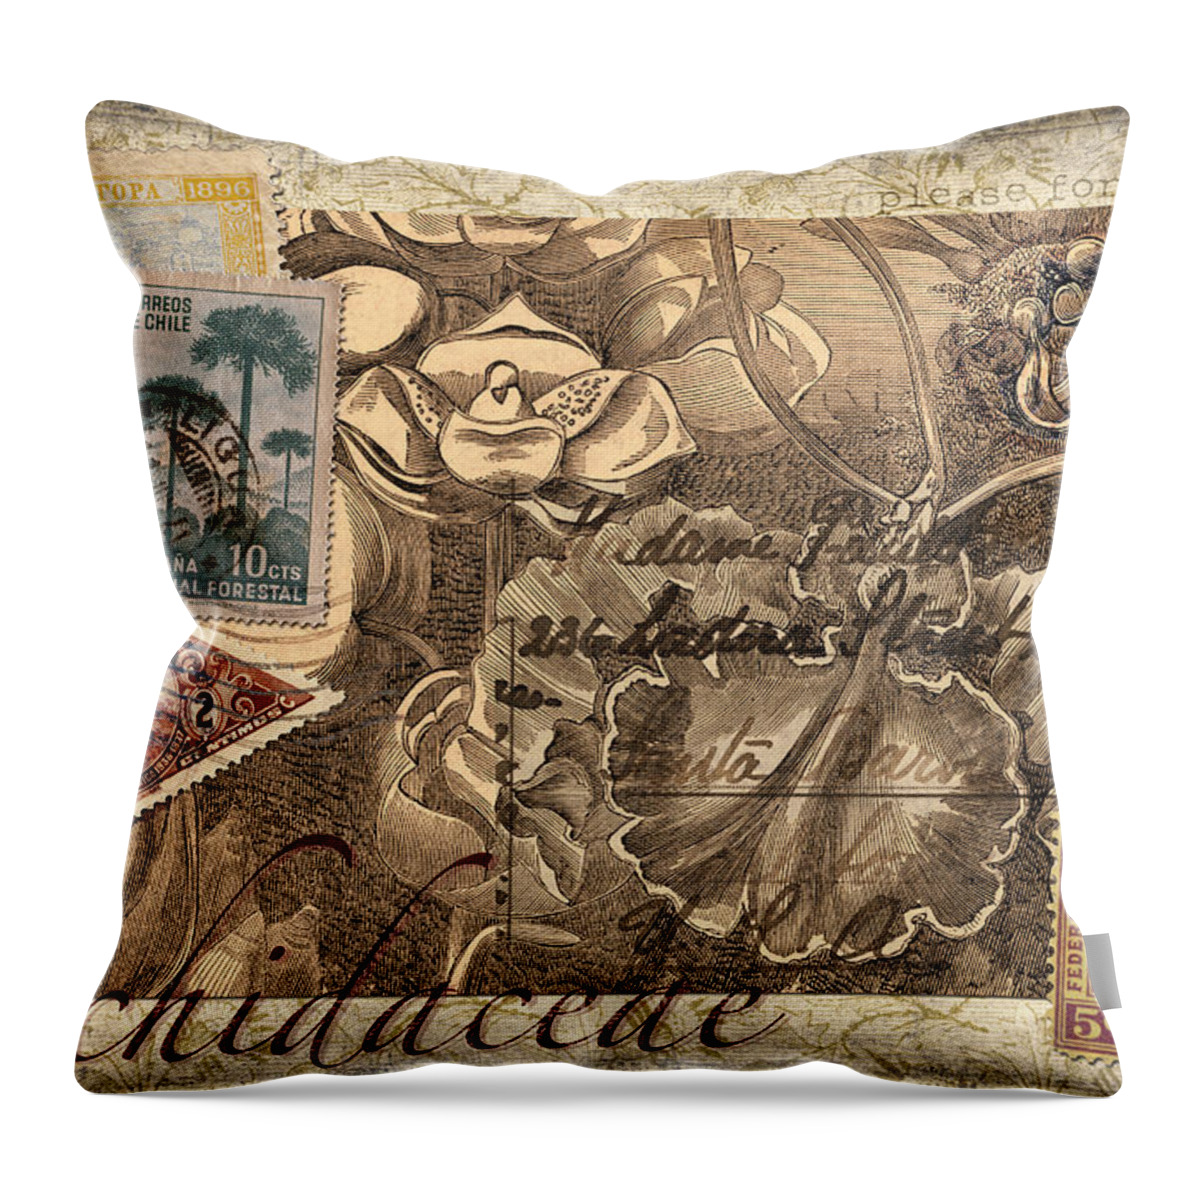 Postcard Throw Pillow featuring the photograph Orchidaceae Postcard by Carol Leigh